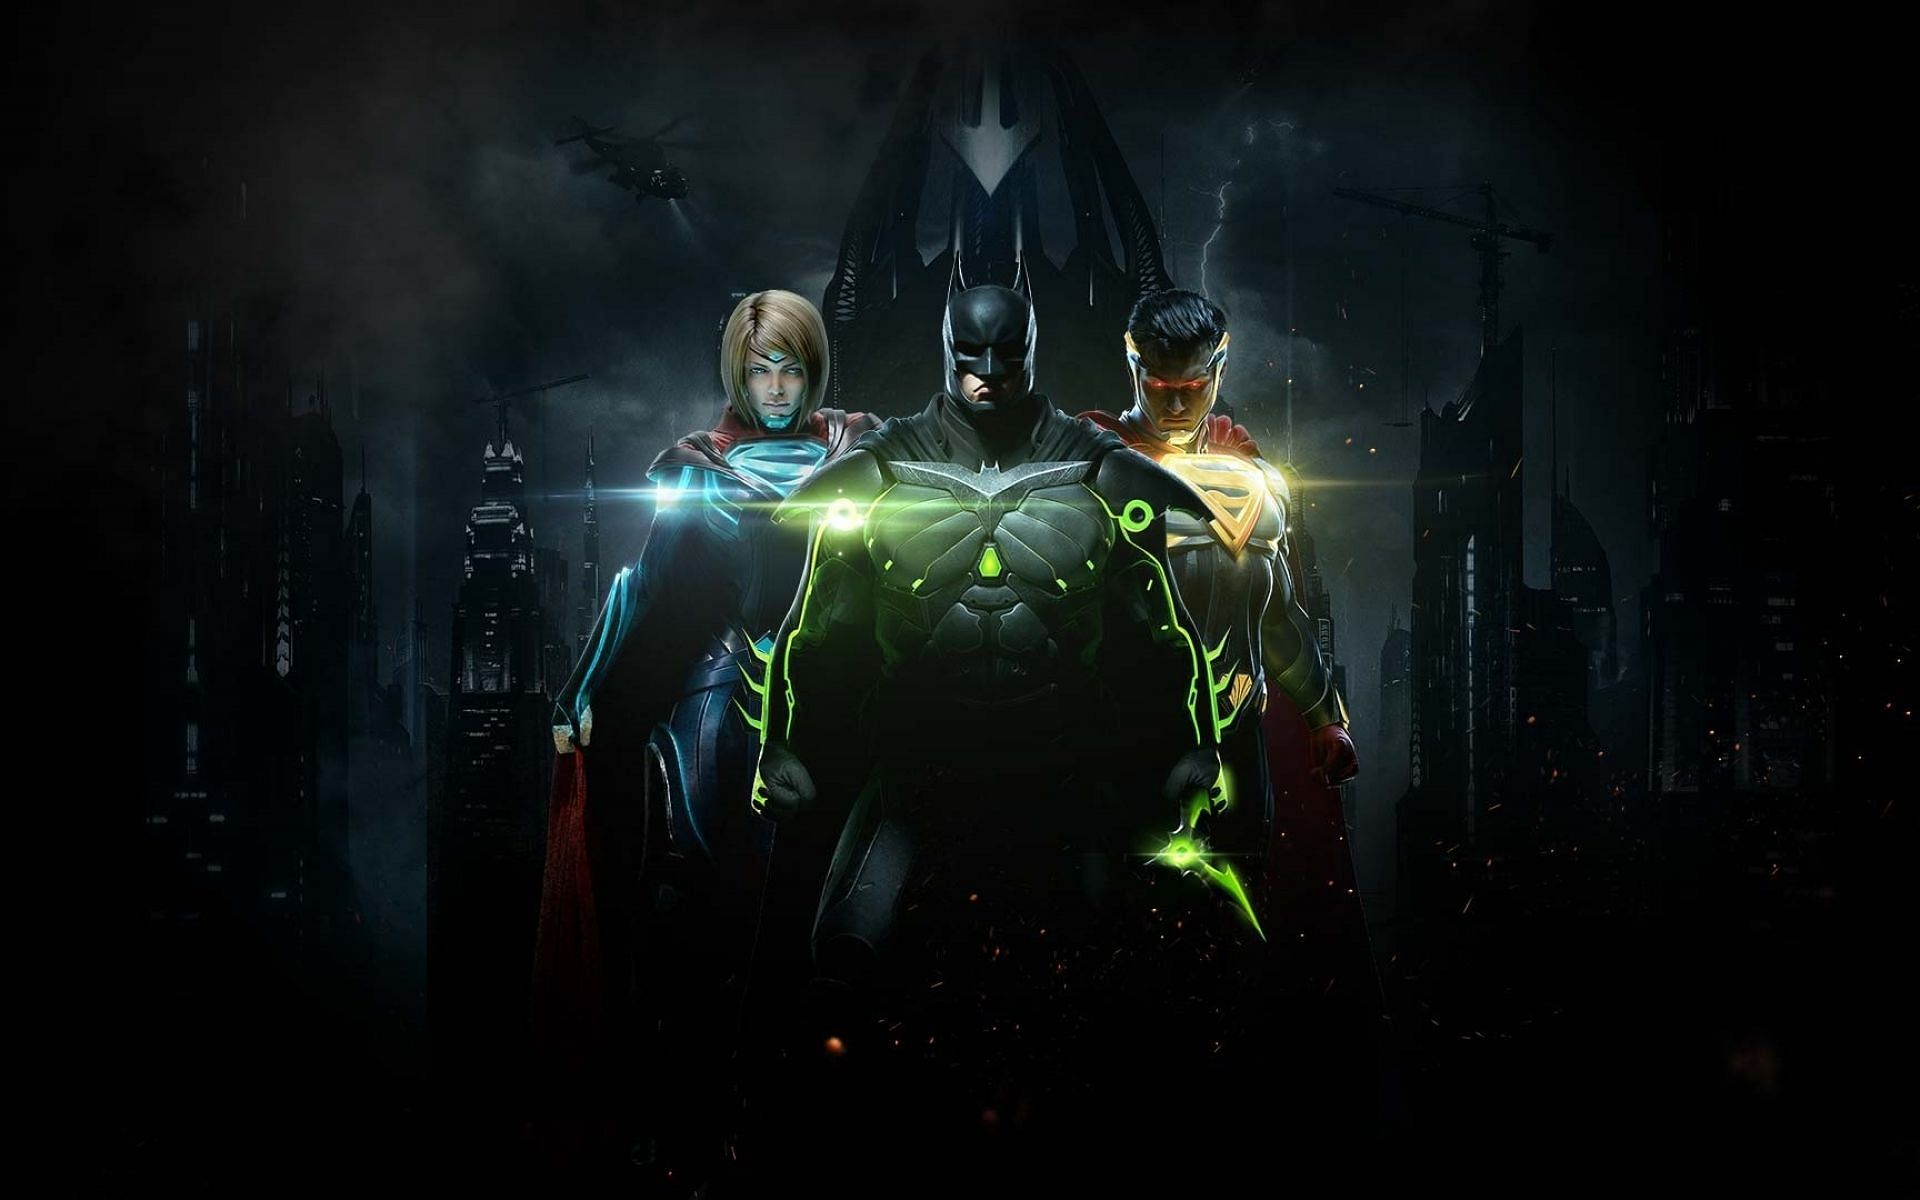 Cover art of the Injustice 2 video game (Image via NetherRealm)